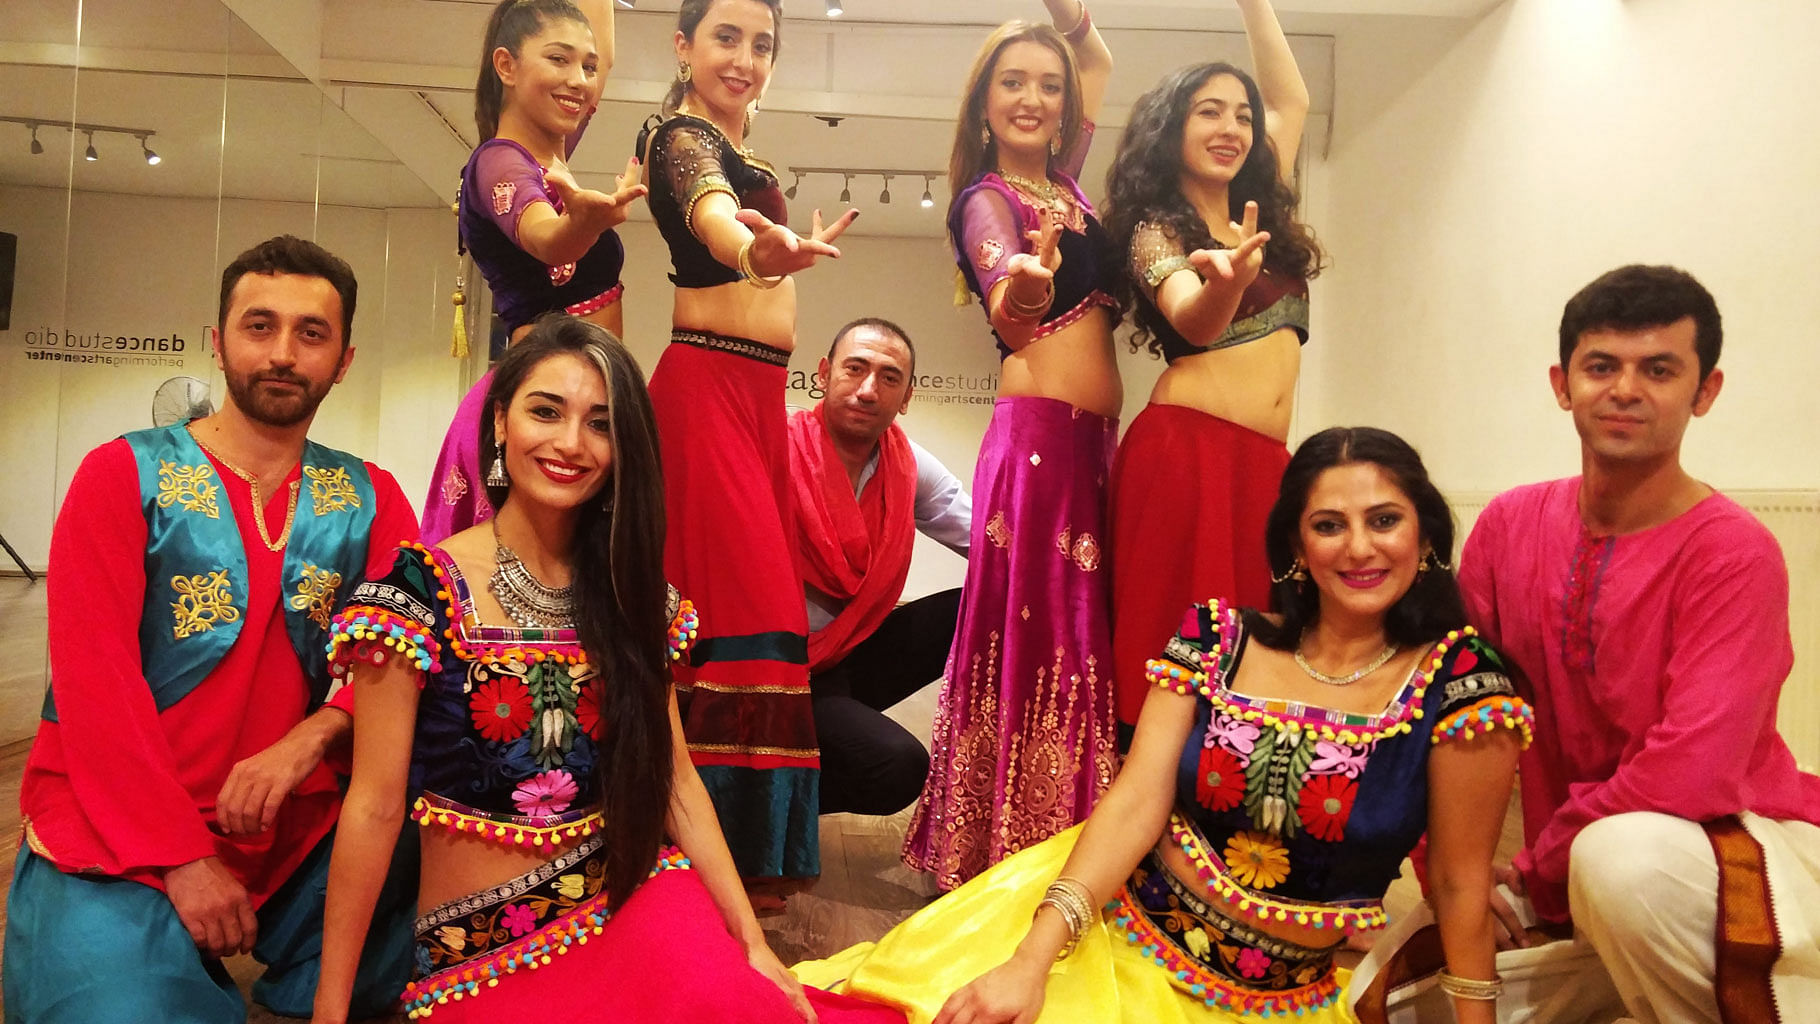 Irmak Eynic and Sabriye Kavuncu’s (centre) started a Bollywood only dancing group in Istanbul, Turkey. (Photo: Parul Agrawal/The Quint)